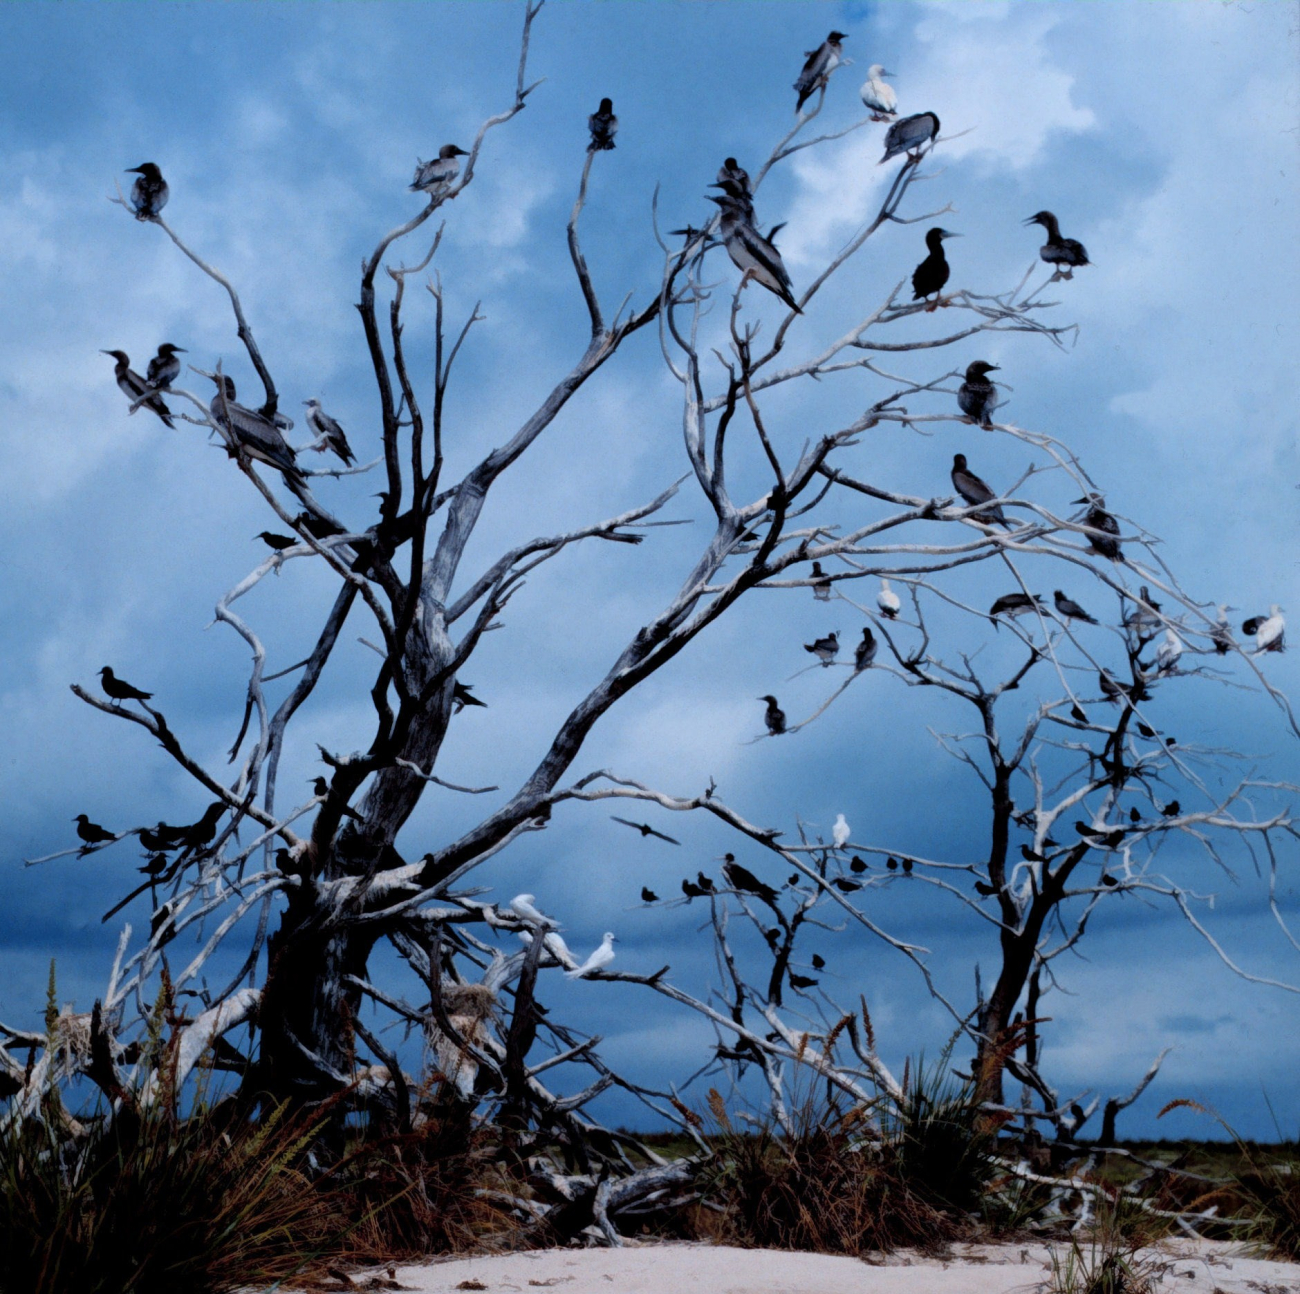 Multiple tropical marine bird species using available remains of trees forperching